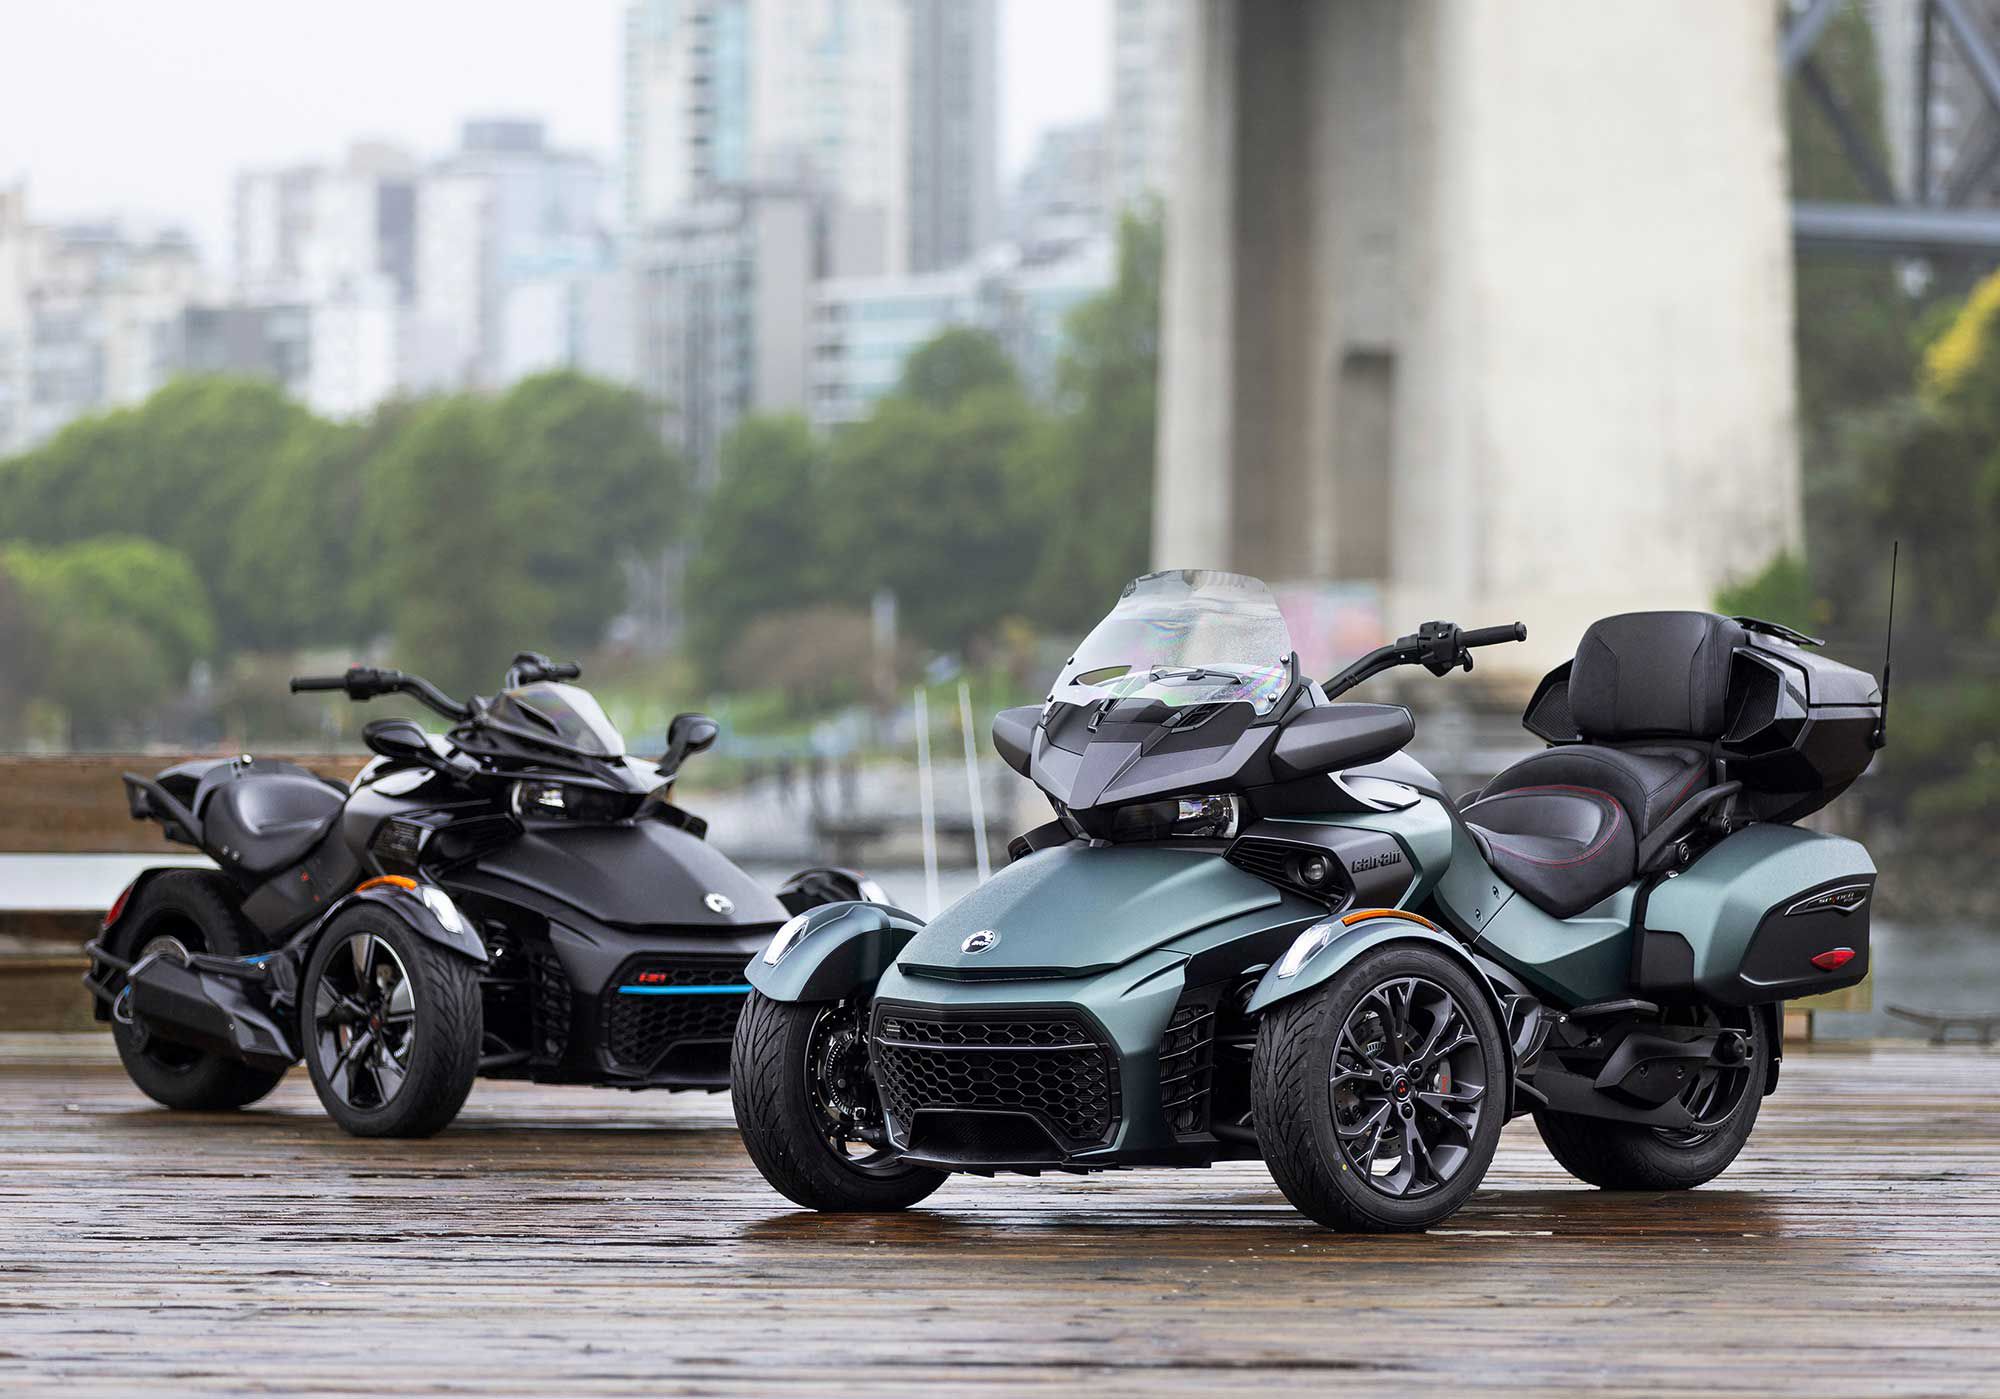 The Can-Am Spyder F3 Limited Special Series in Mineral Blue, in foreground.